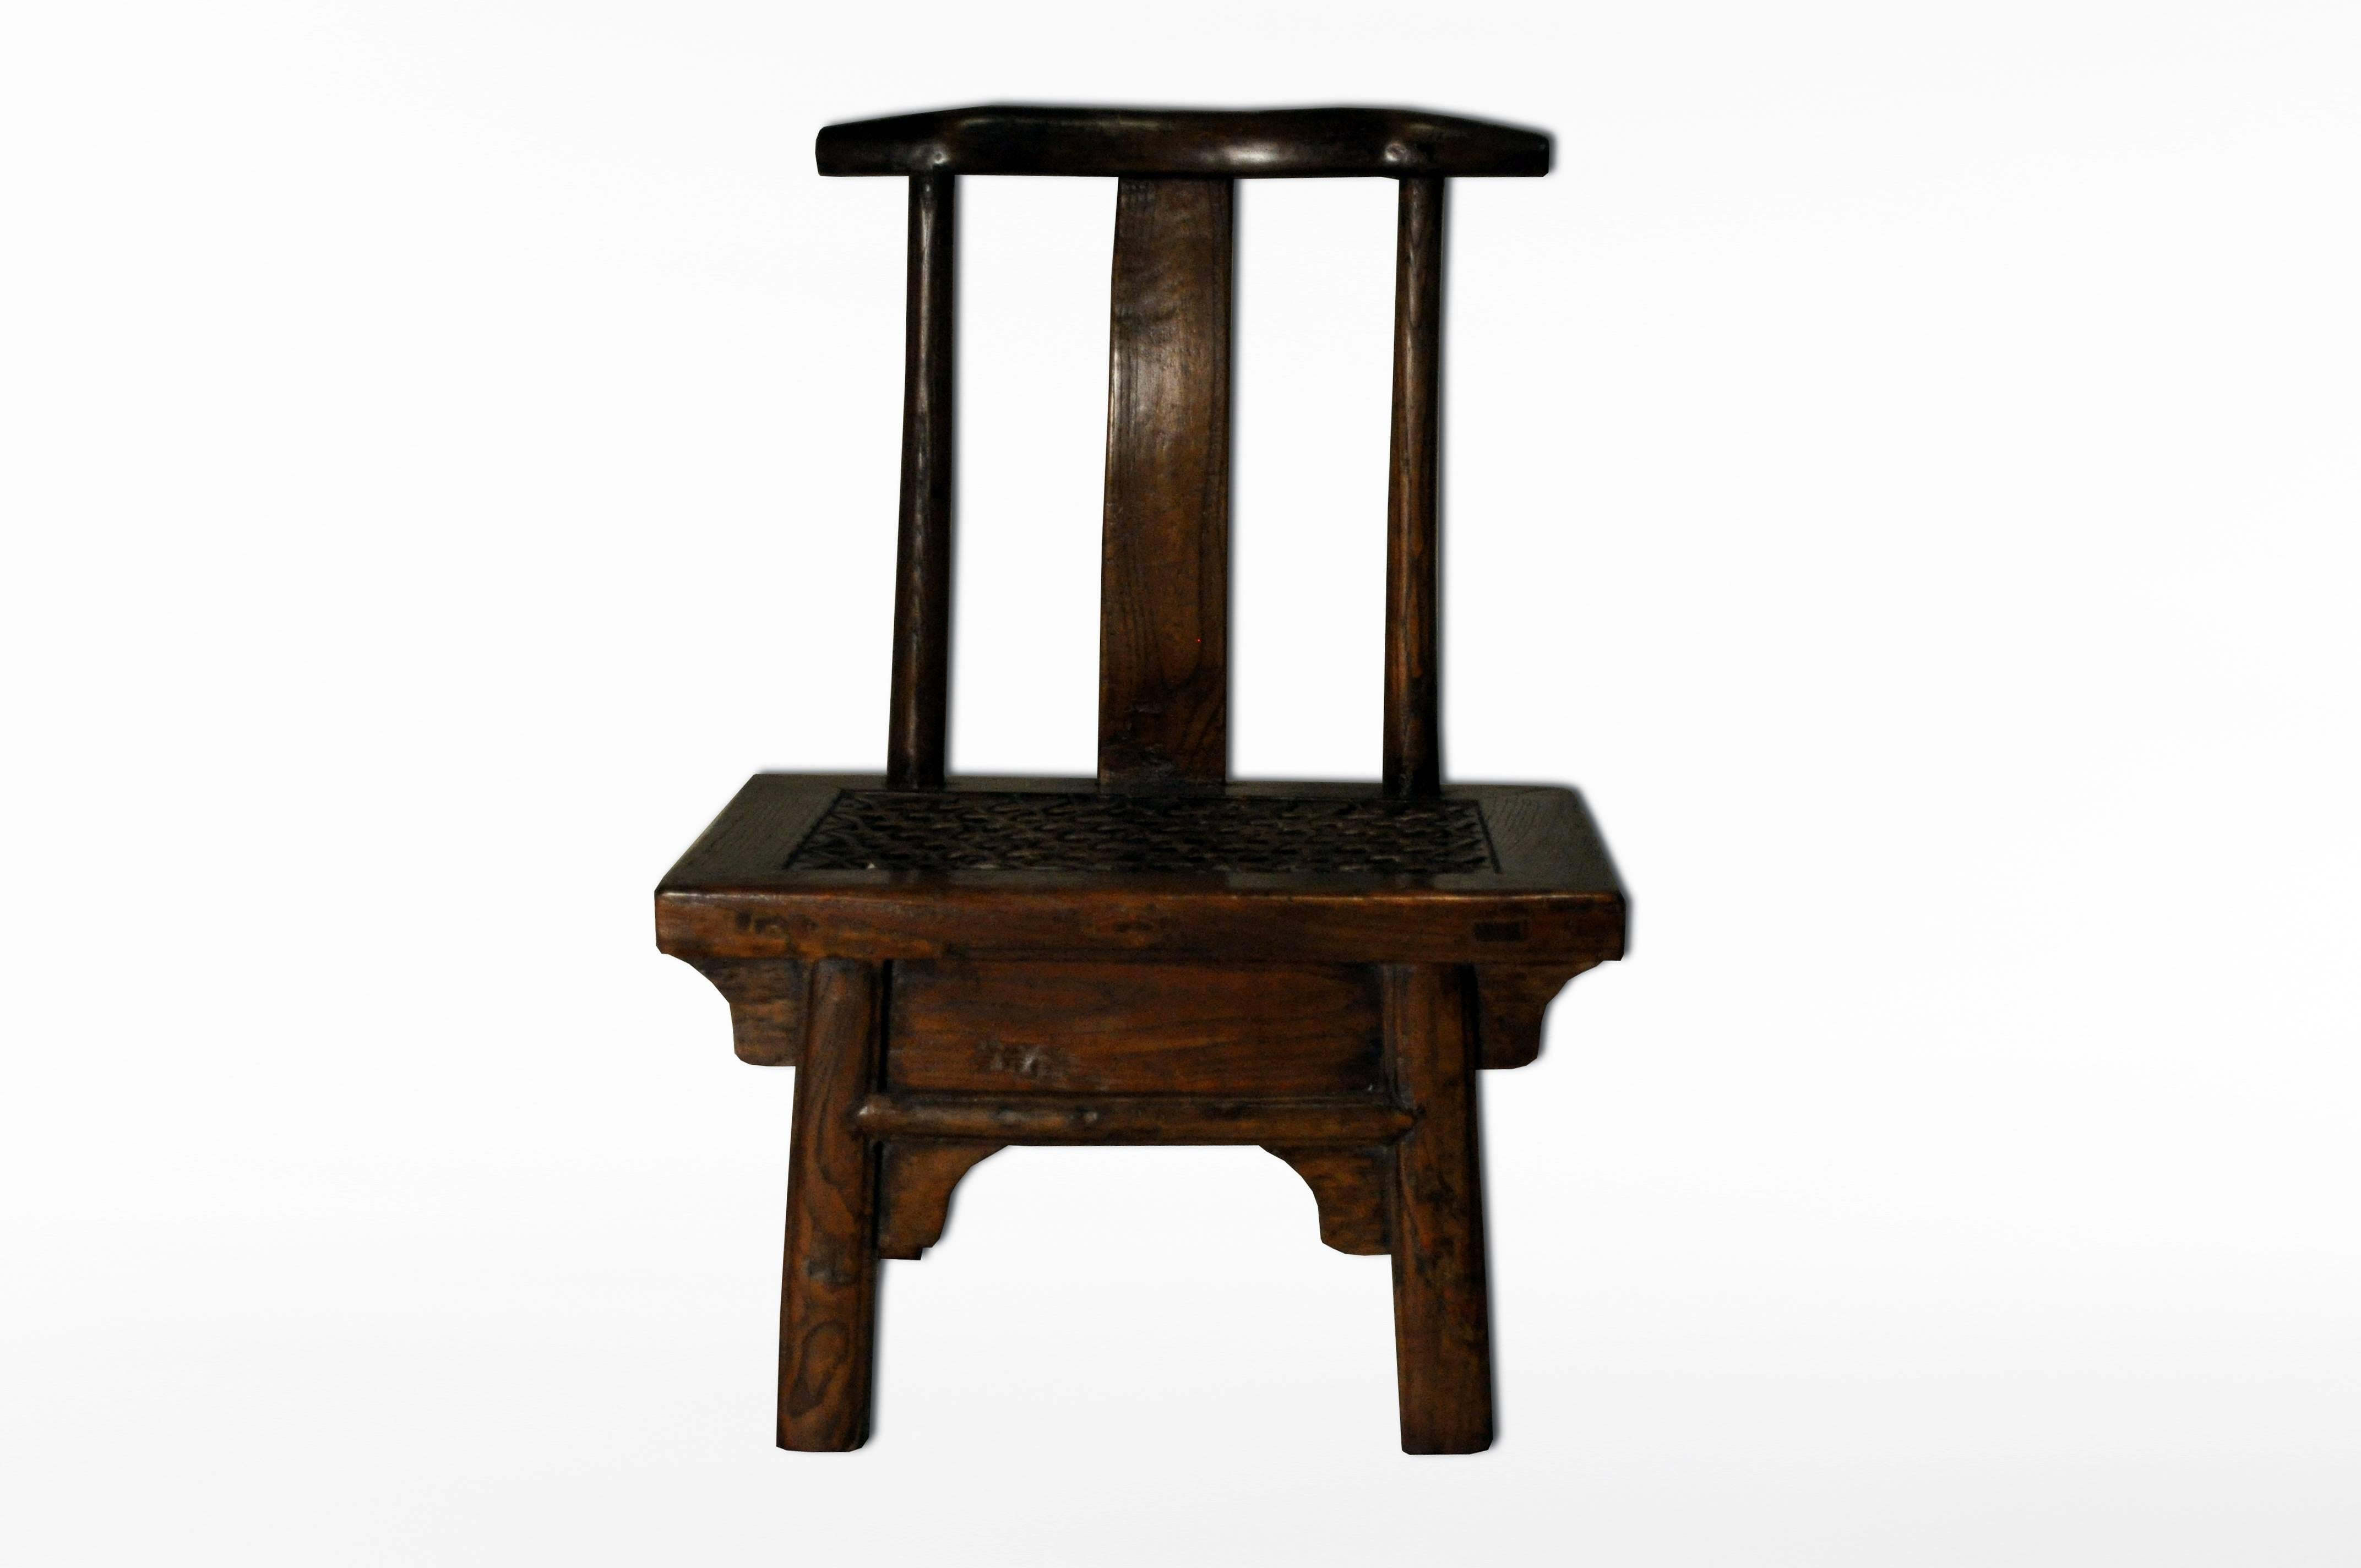 This Chinese side chair is from Henan, China and is made from Yang wood and leather.